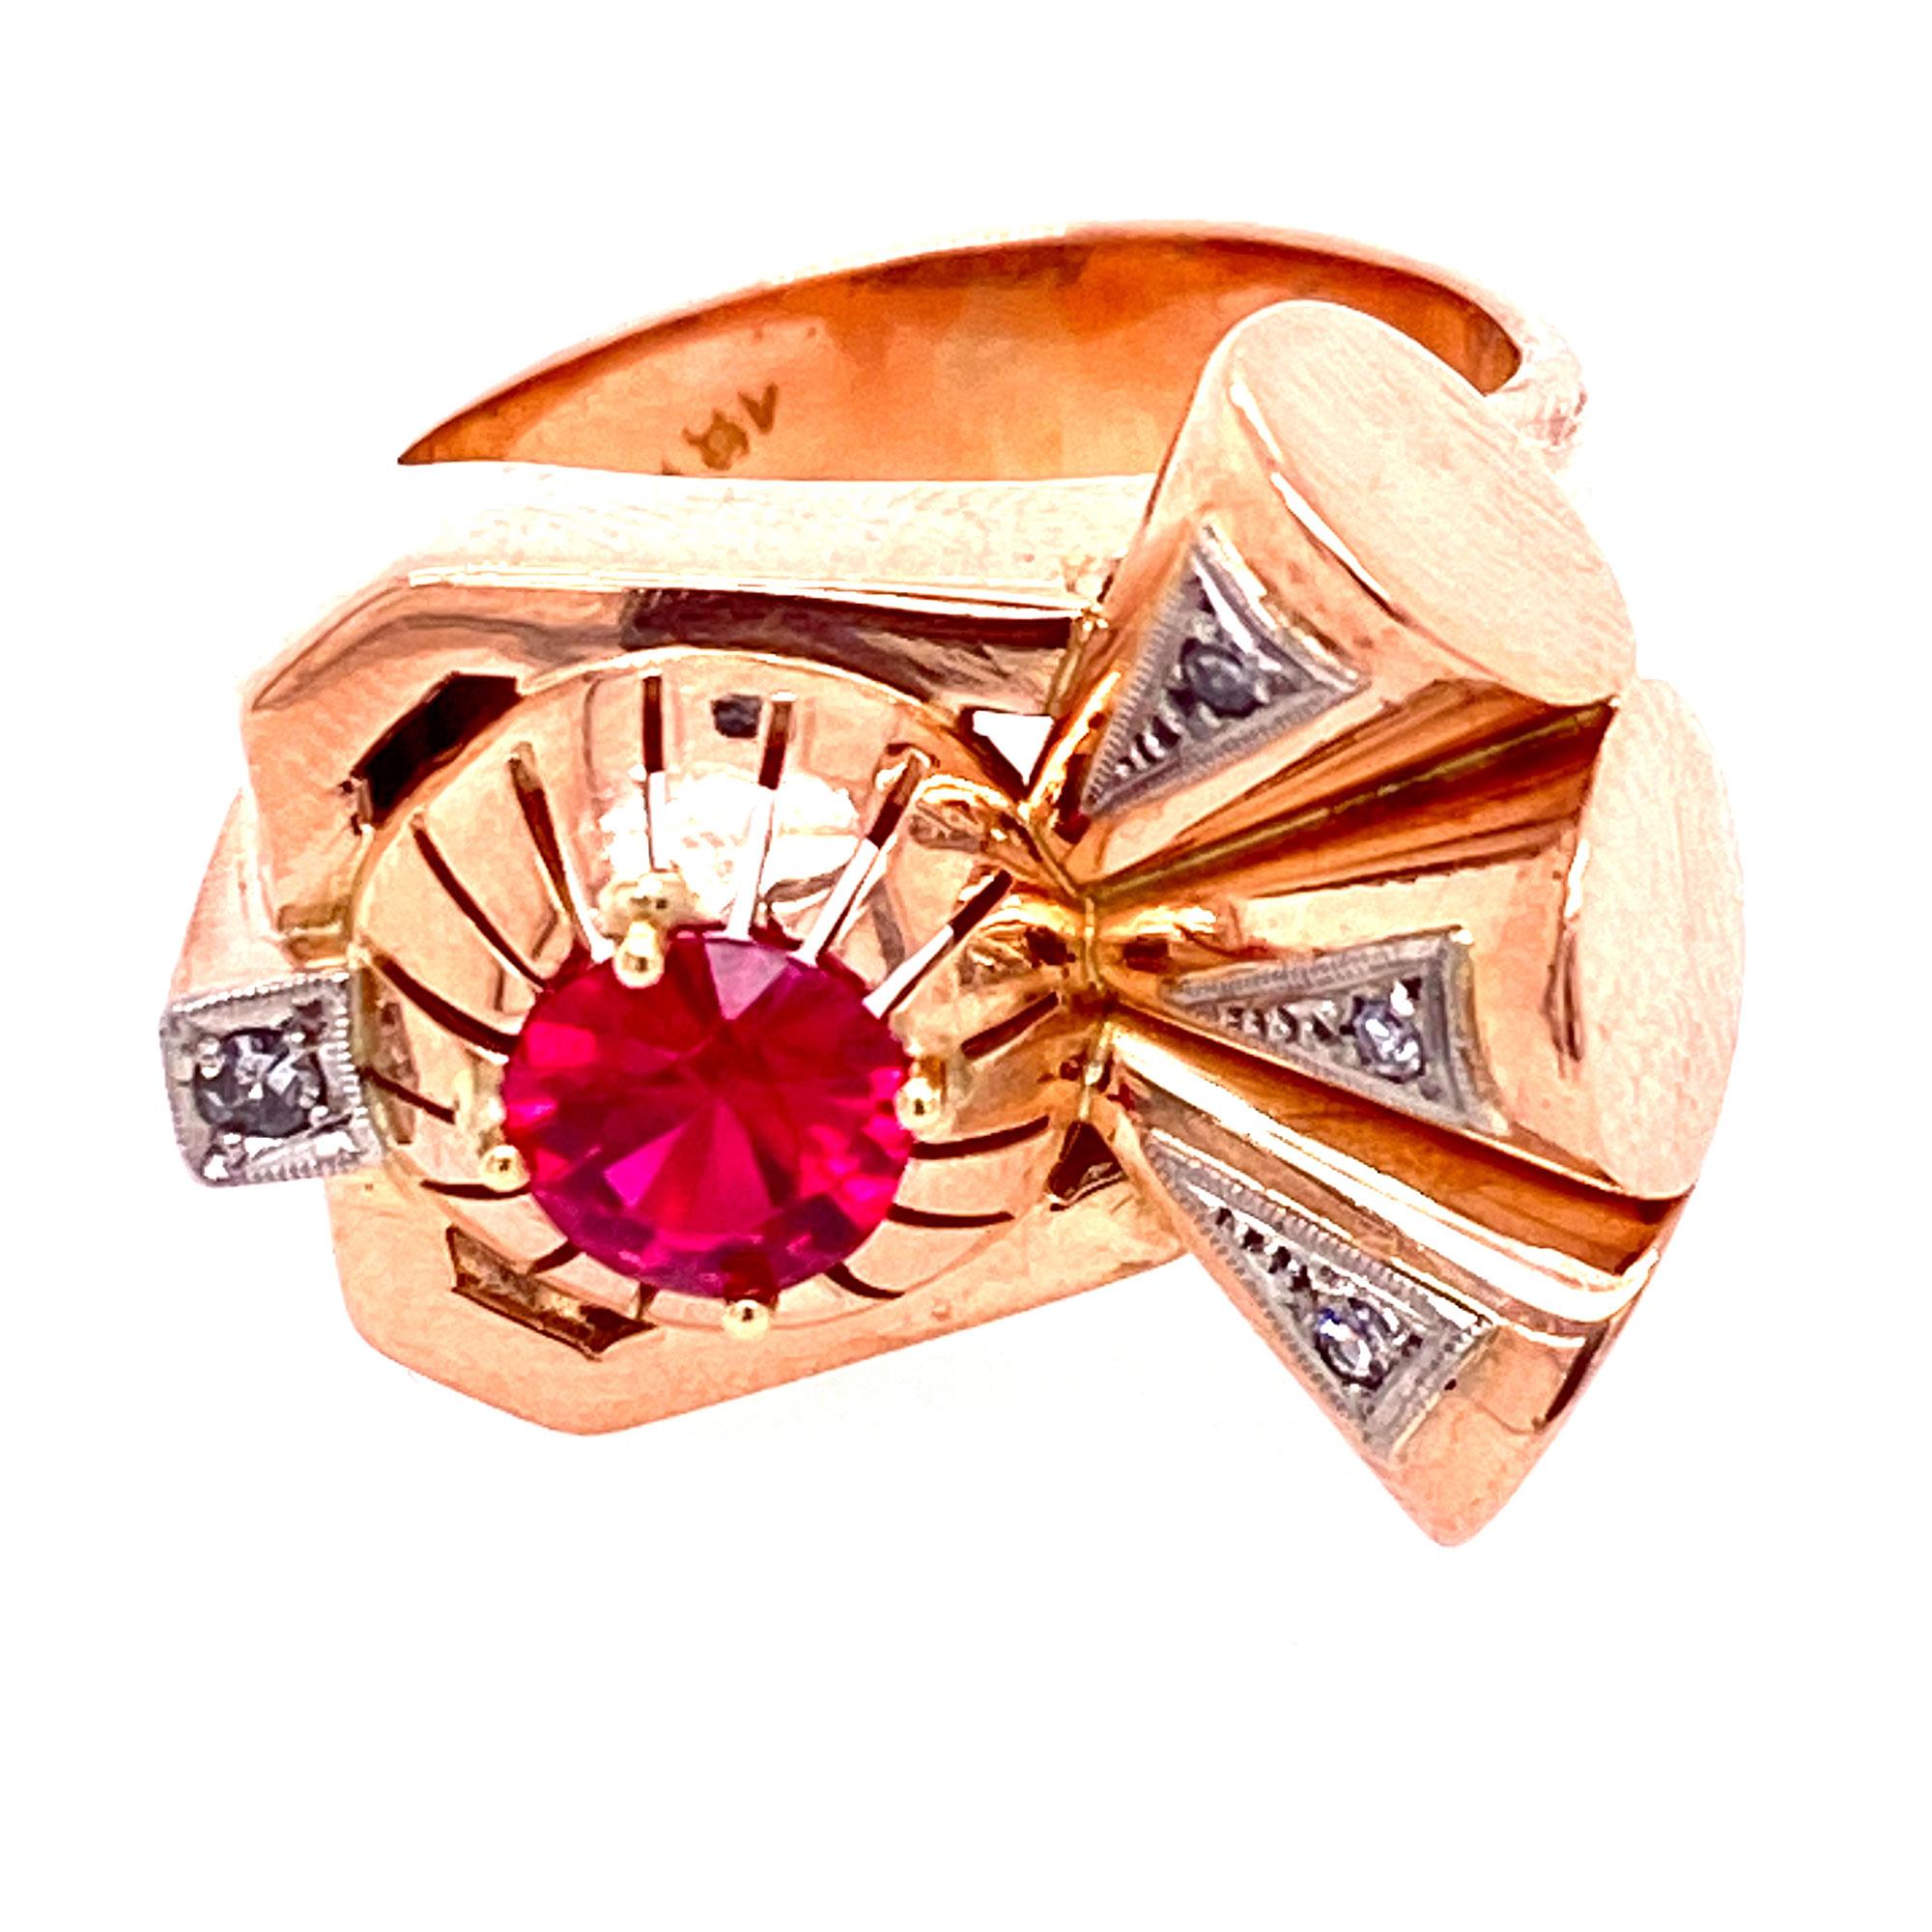 Retro cocktail ring fashioned in rose gold and white gold. The 1940's ring features an approximately .65 carat genuine red ruby and diamond accents. Currently the ring is size 5.75 (can be sized), and measures 20mm in width. 